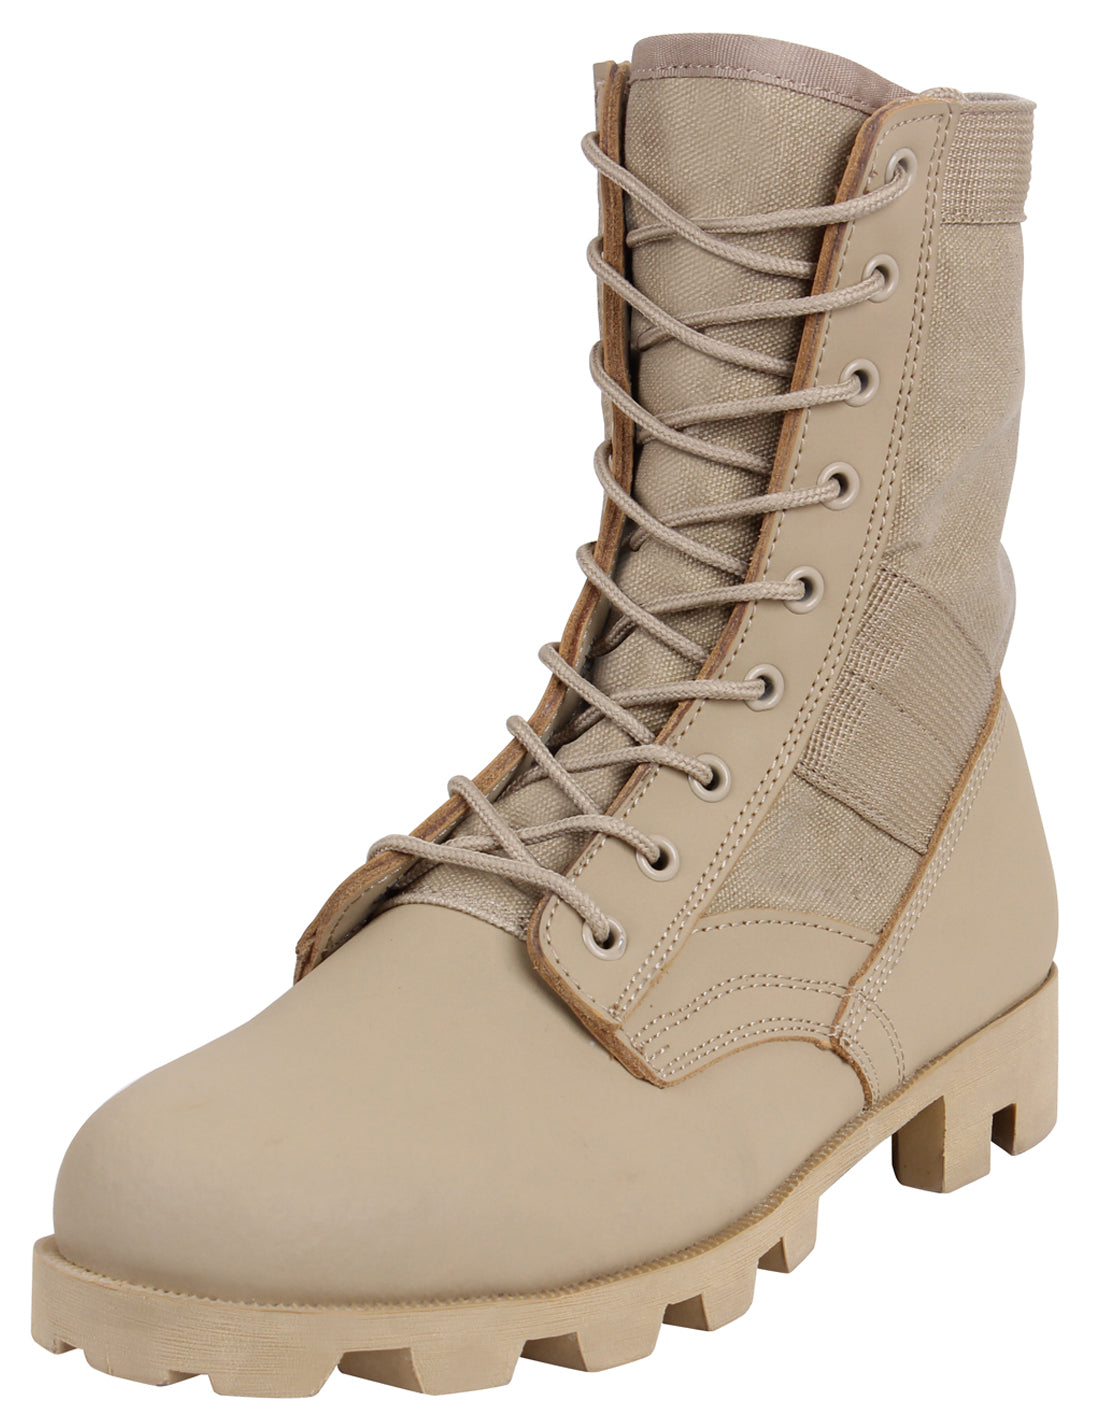 Rothco Jungle Boots Military Style Boot - 8 Inch